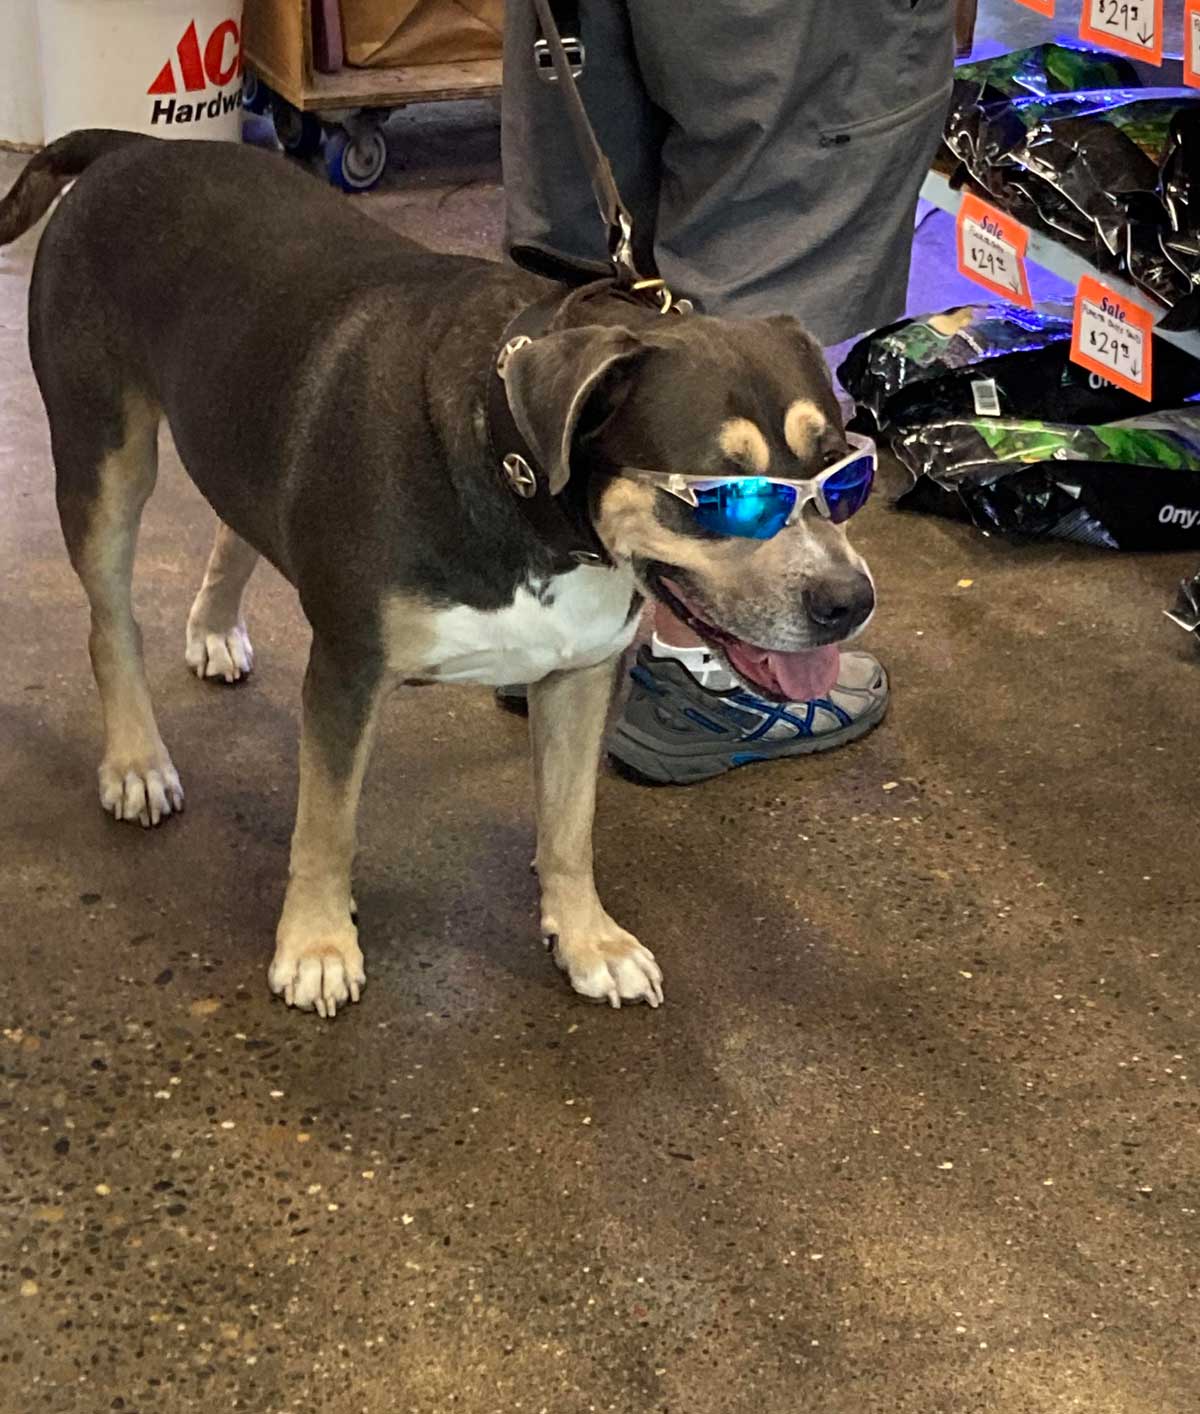 Saw this dude at a local shop